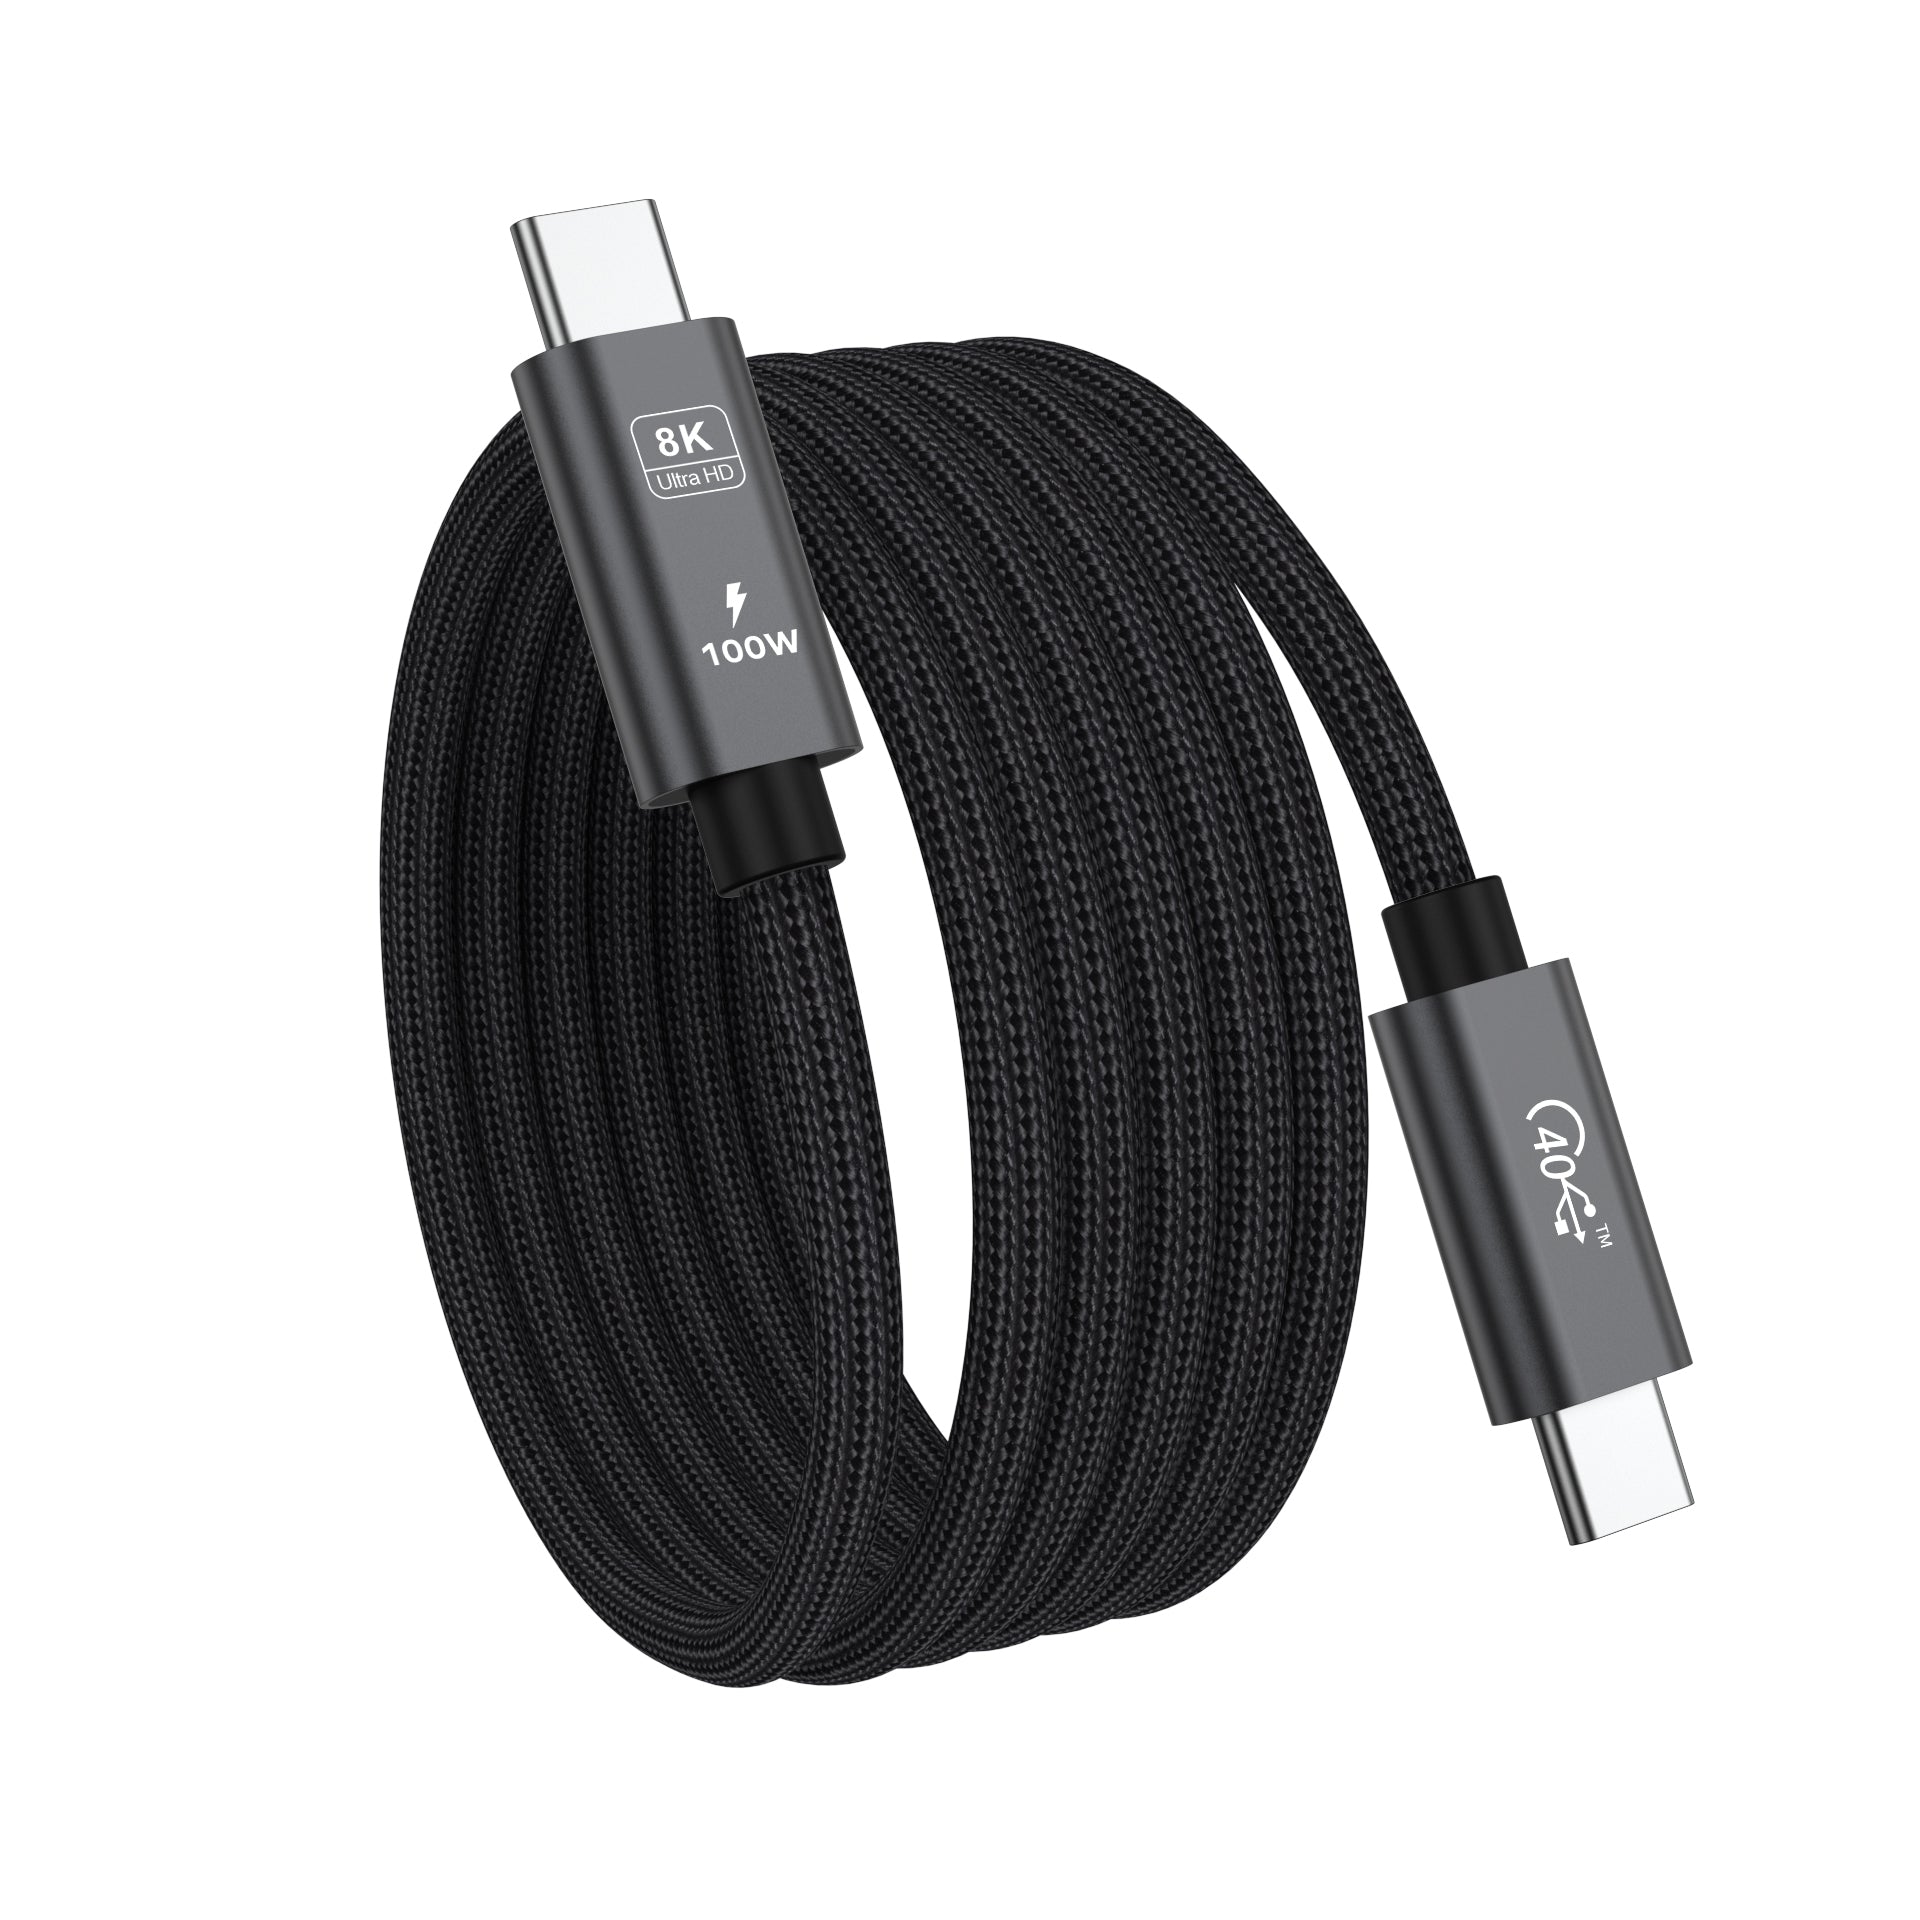 Magcable USB4 | Magnetic USB-C to USB-C Cable 100W (1m)